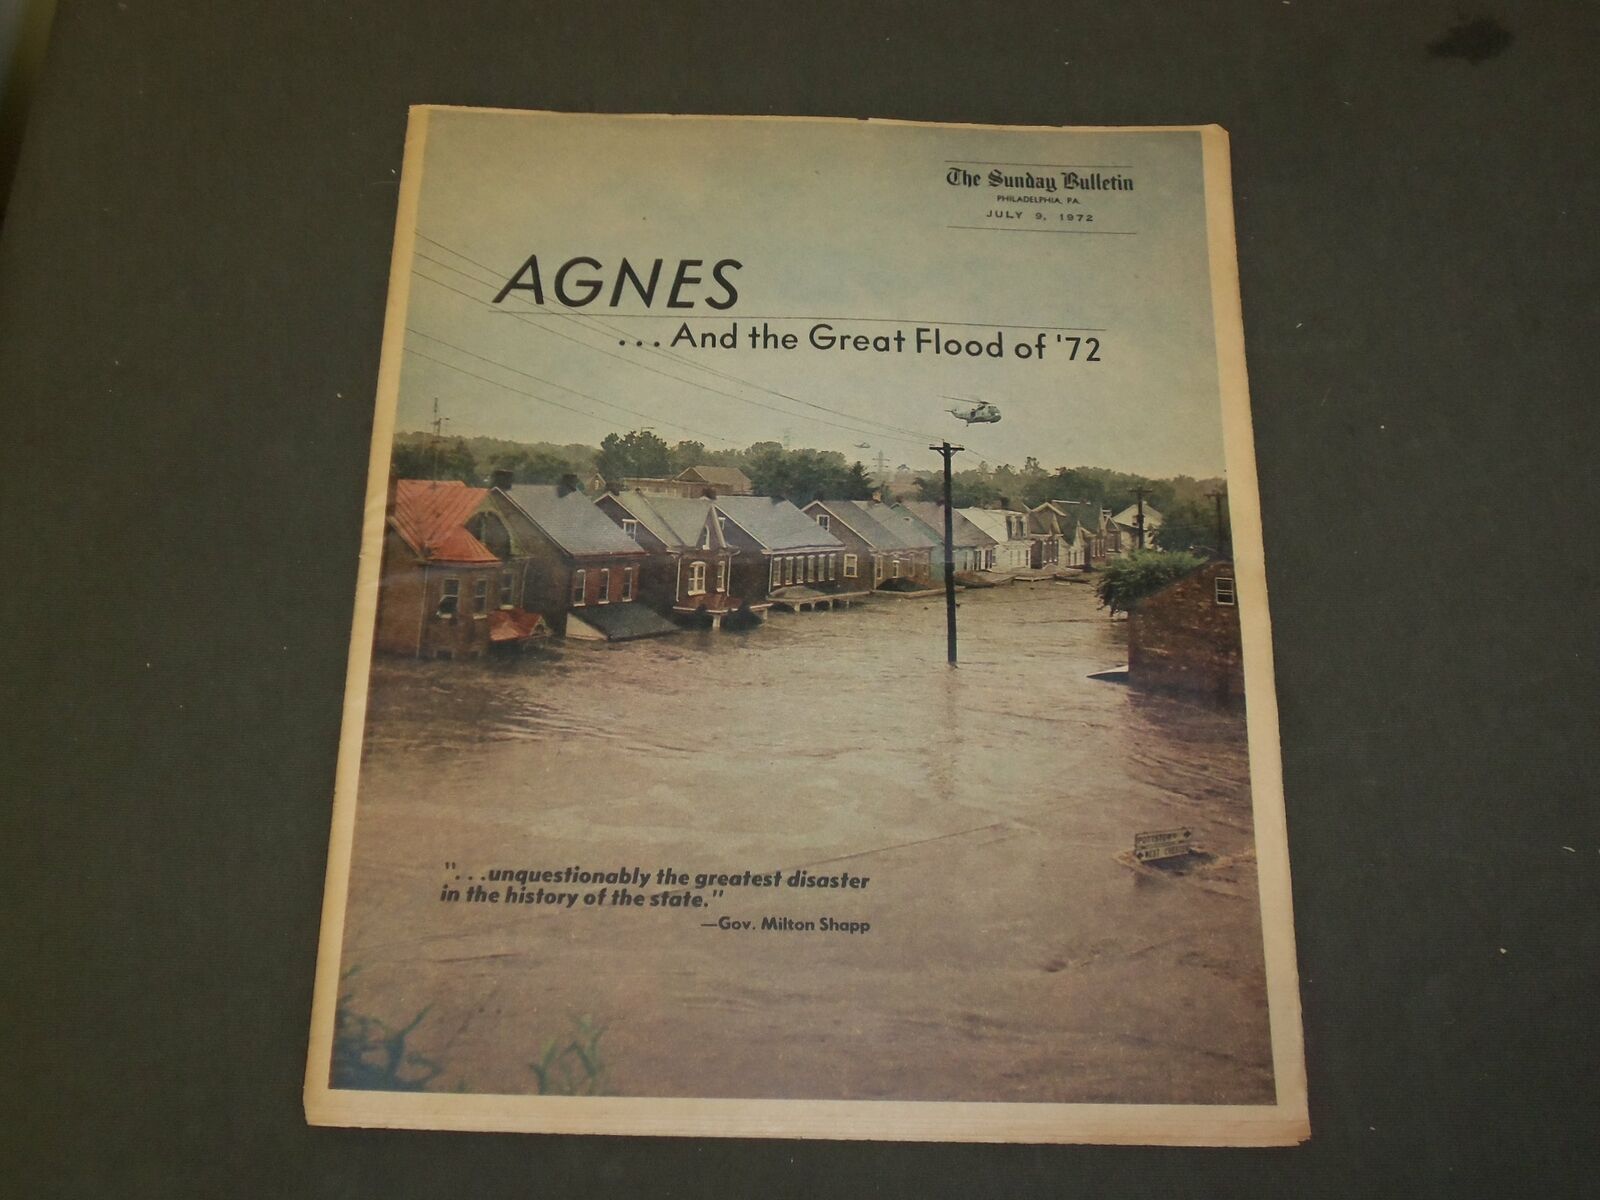 1972 JULY 9 THE SUNDAY BULLETIN NEWSPAPER - AGNES AND GREAT FLOOD OF 72- NP 3425